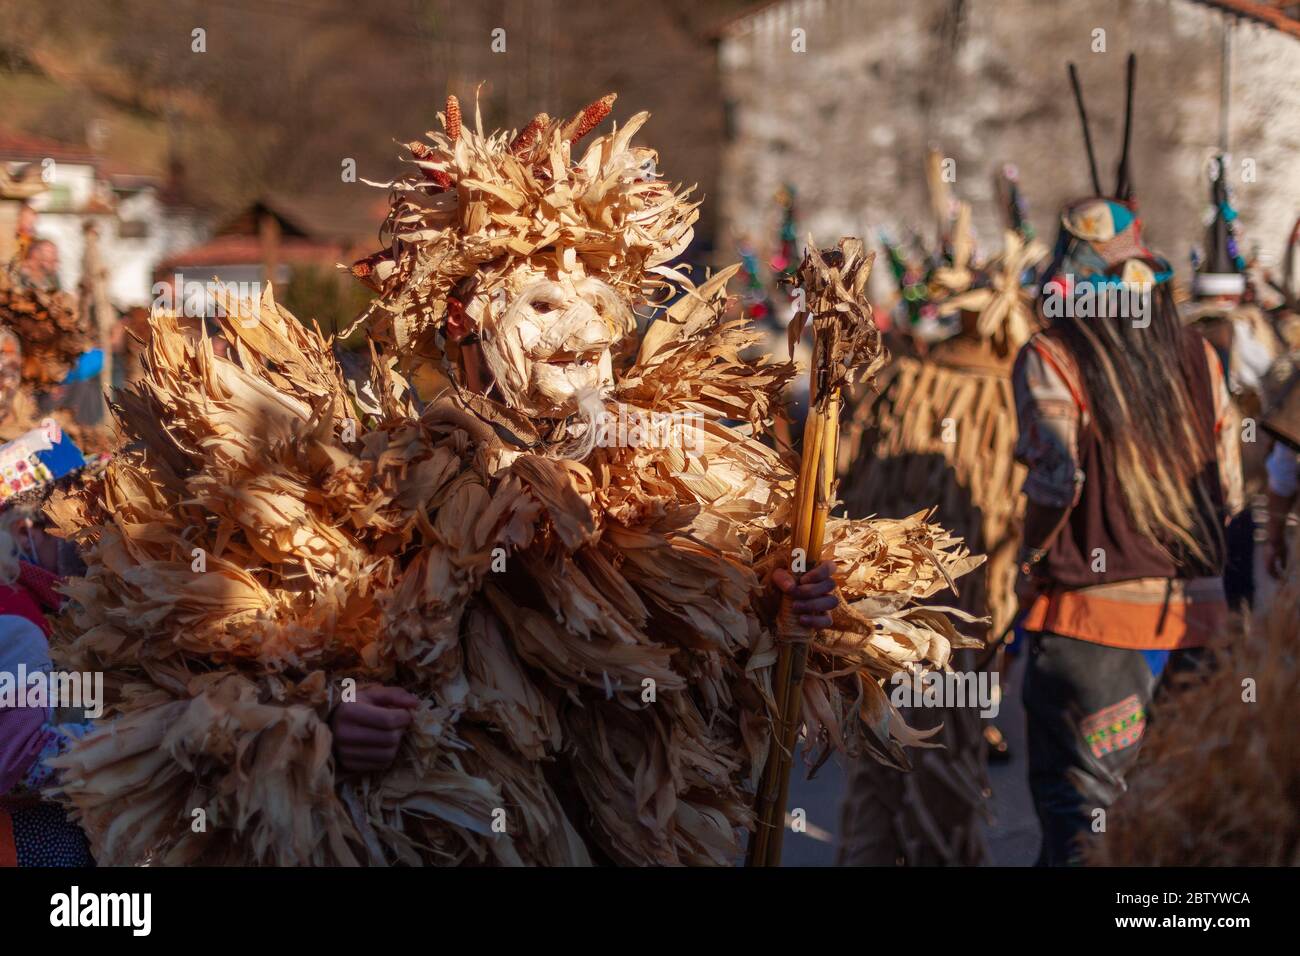 Silió, Cantabria, Spain - January 6, 2019: Vijanera is a winter masquerade that takes place in the Spanish town of Silió, in Cantabria, on the first S Stock Photo